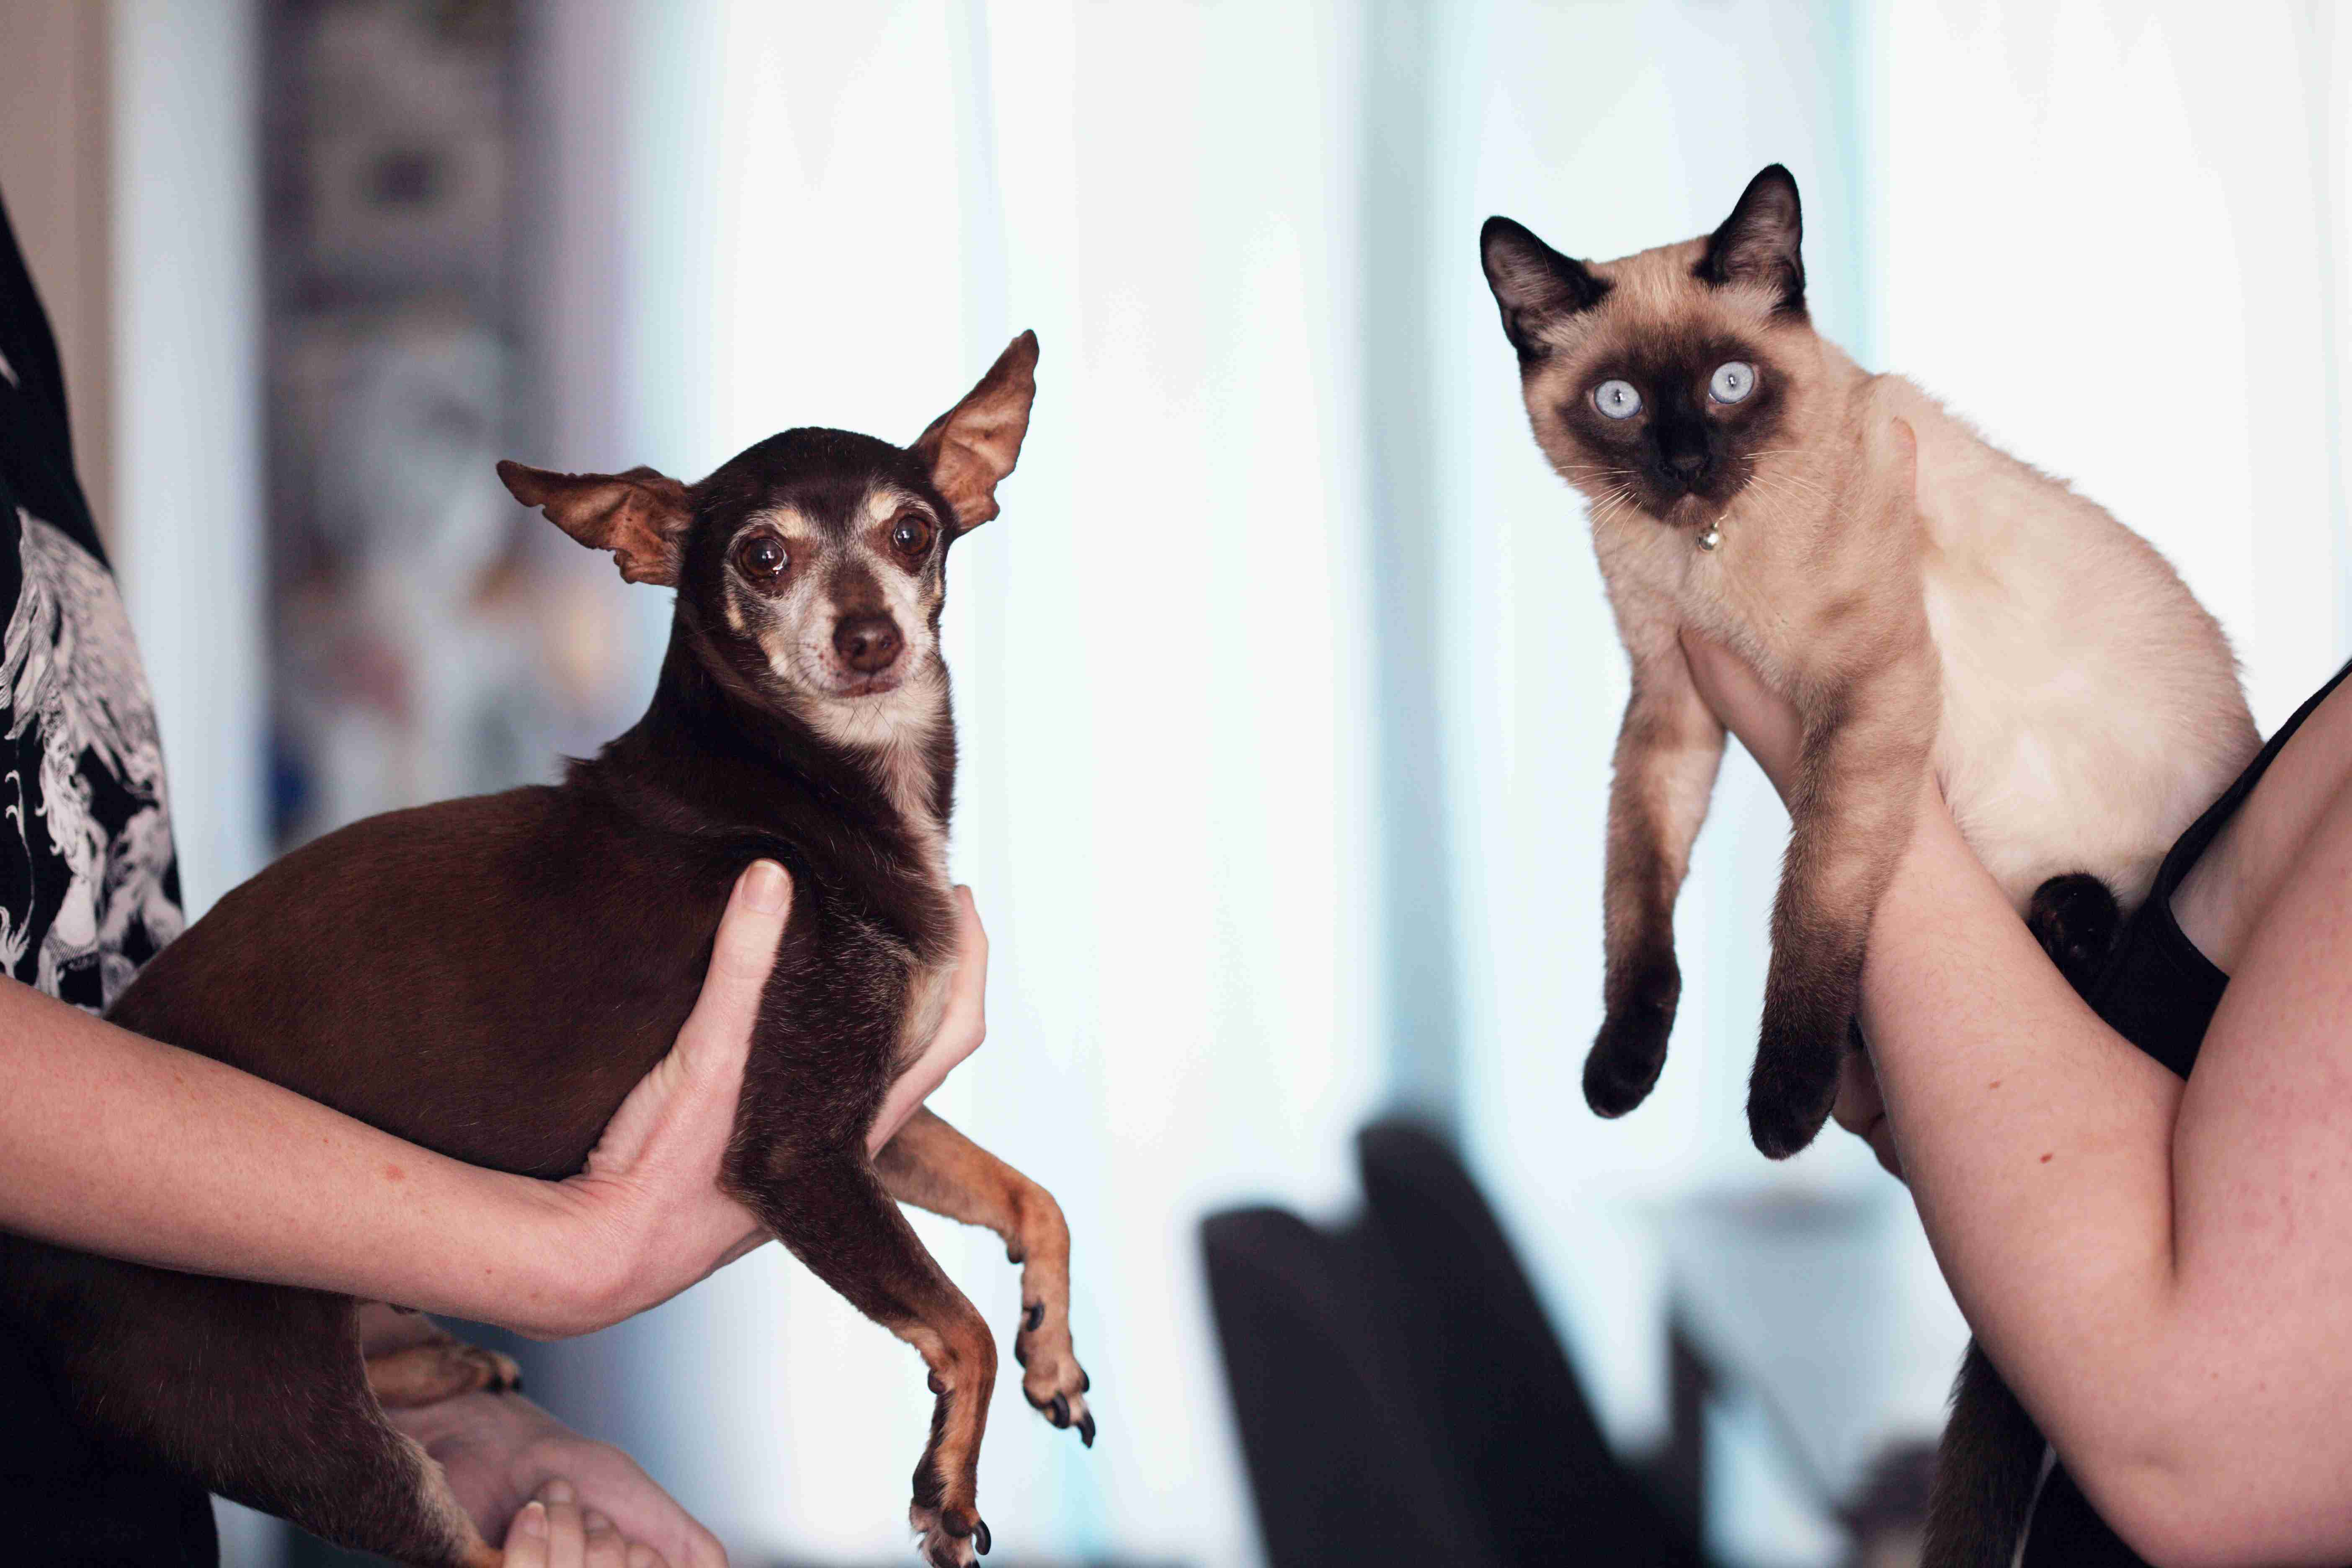 How can you safely break up a fight between two Chihuahuas?